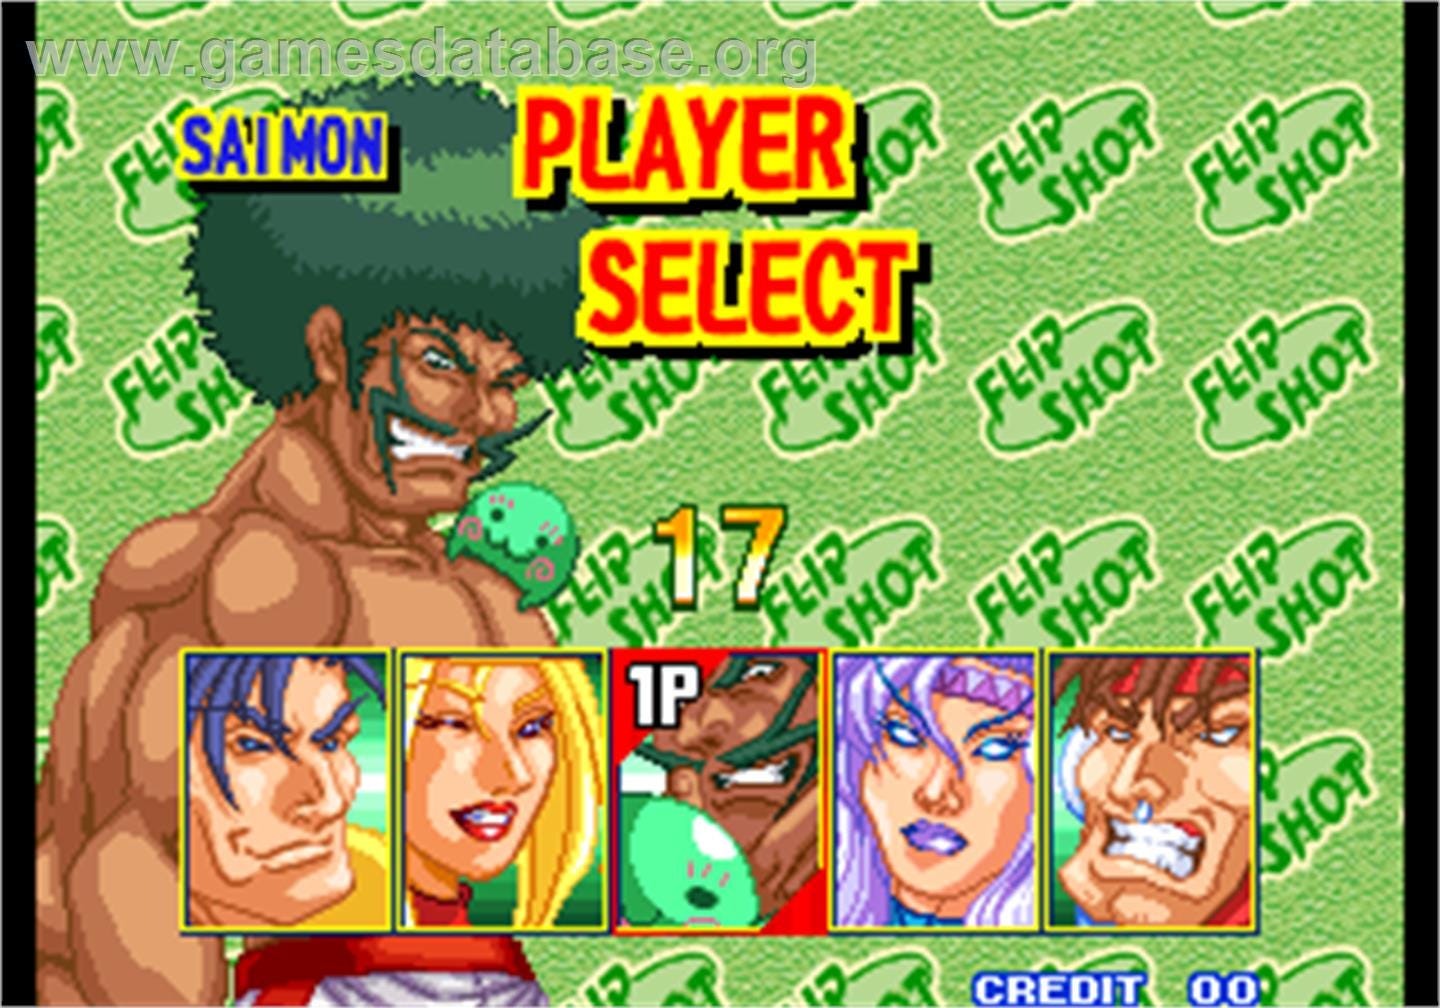 A screenshot of the player select screen from Battle Flip Shot, featuring all five characters in portraits, with larger character art in the background for whichever one the cursor is currently on.